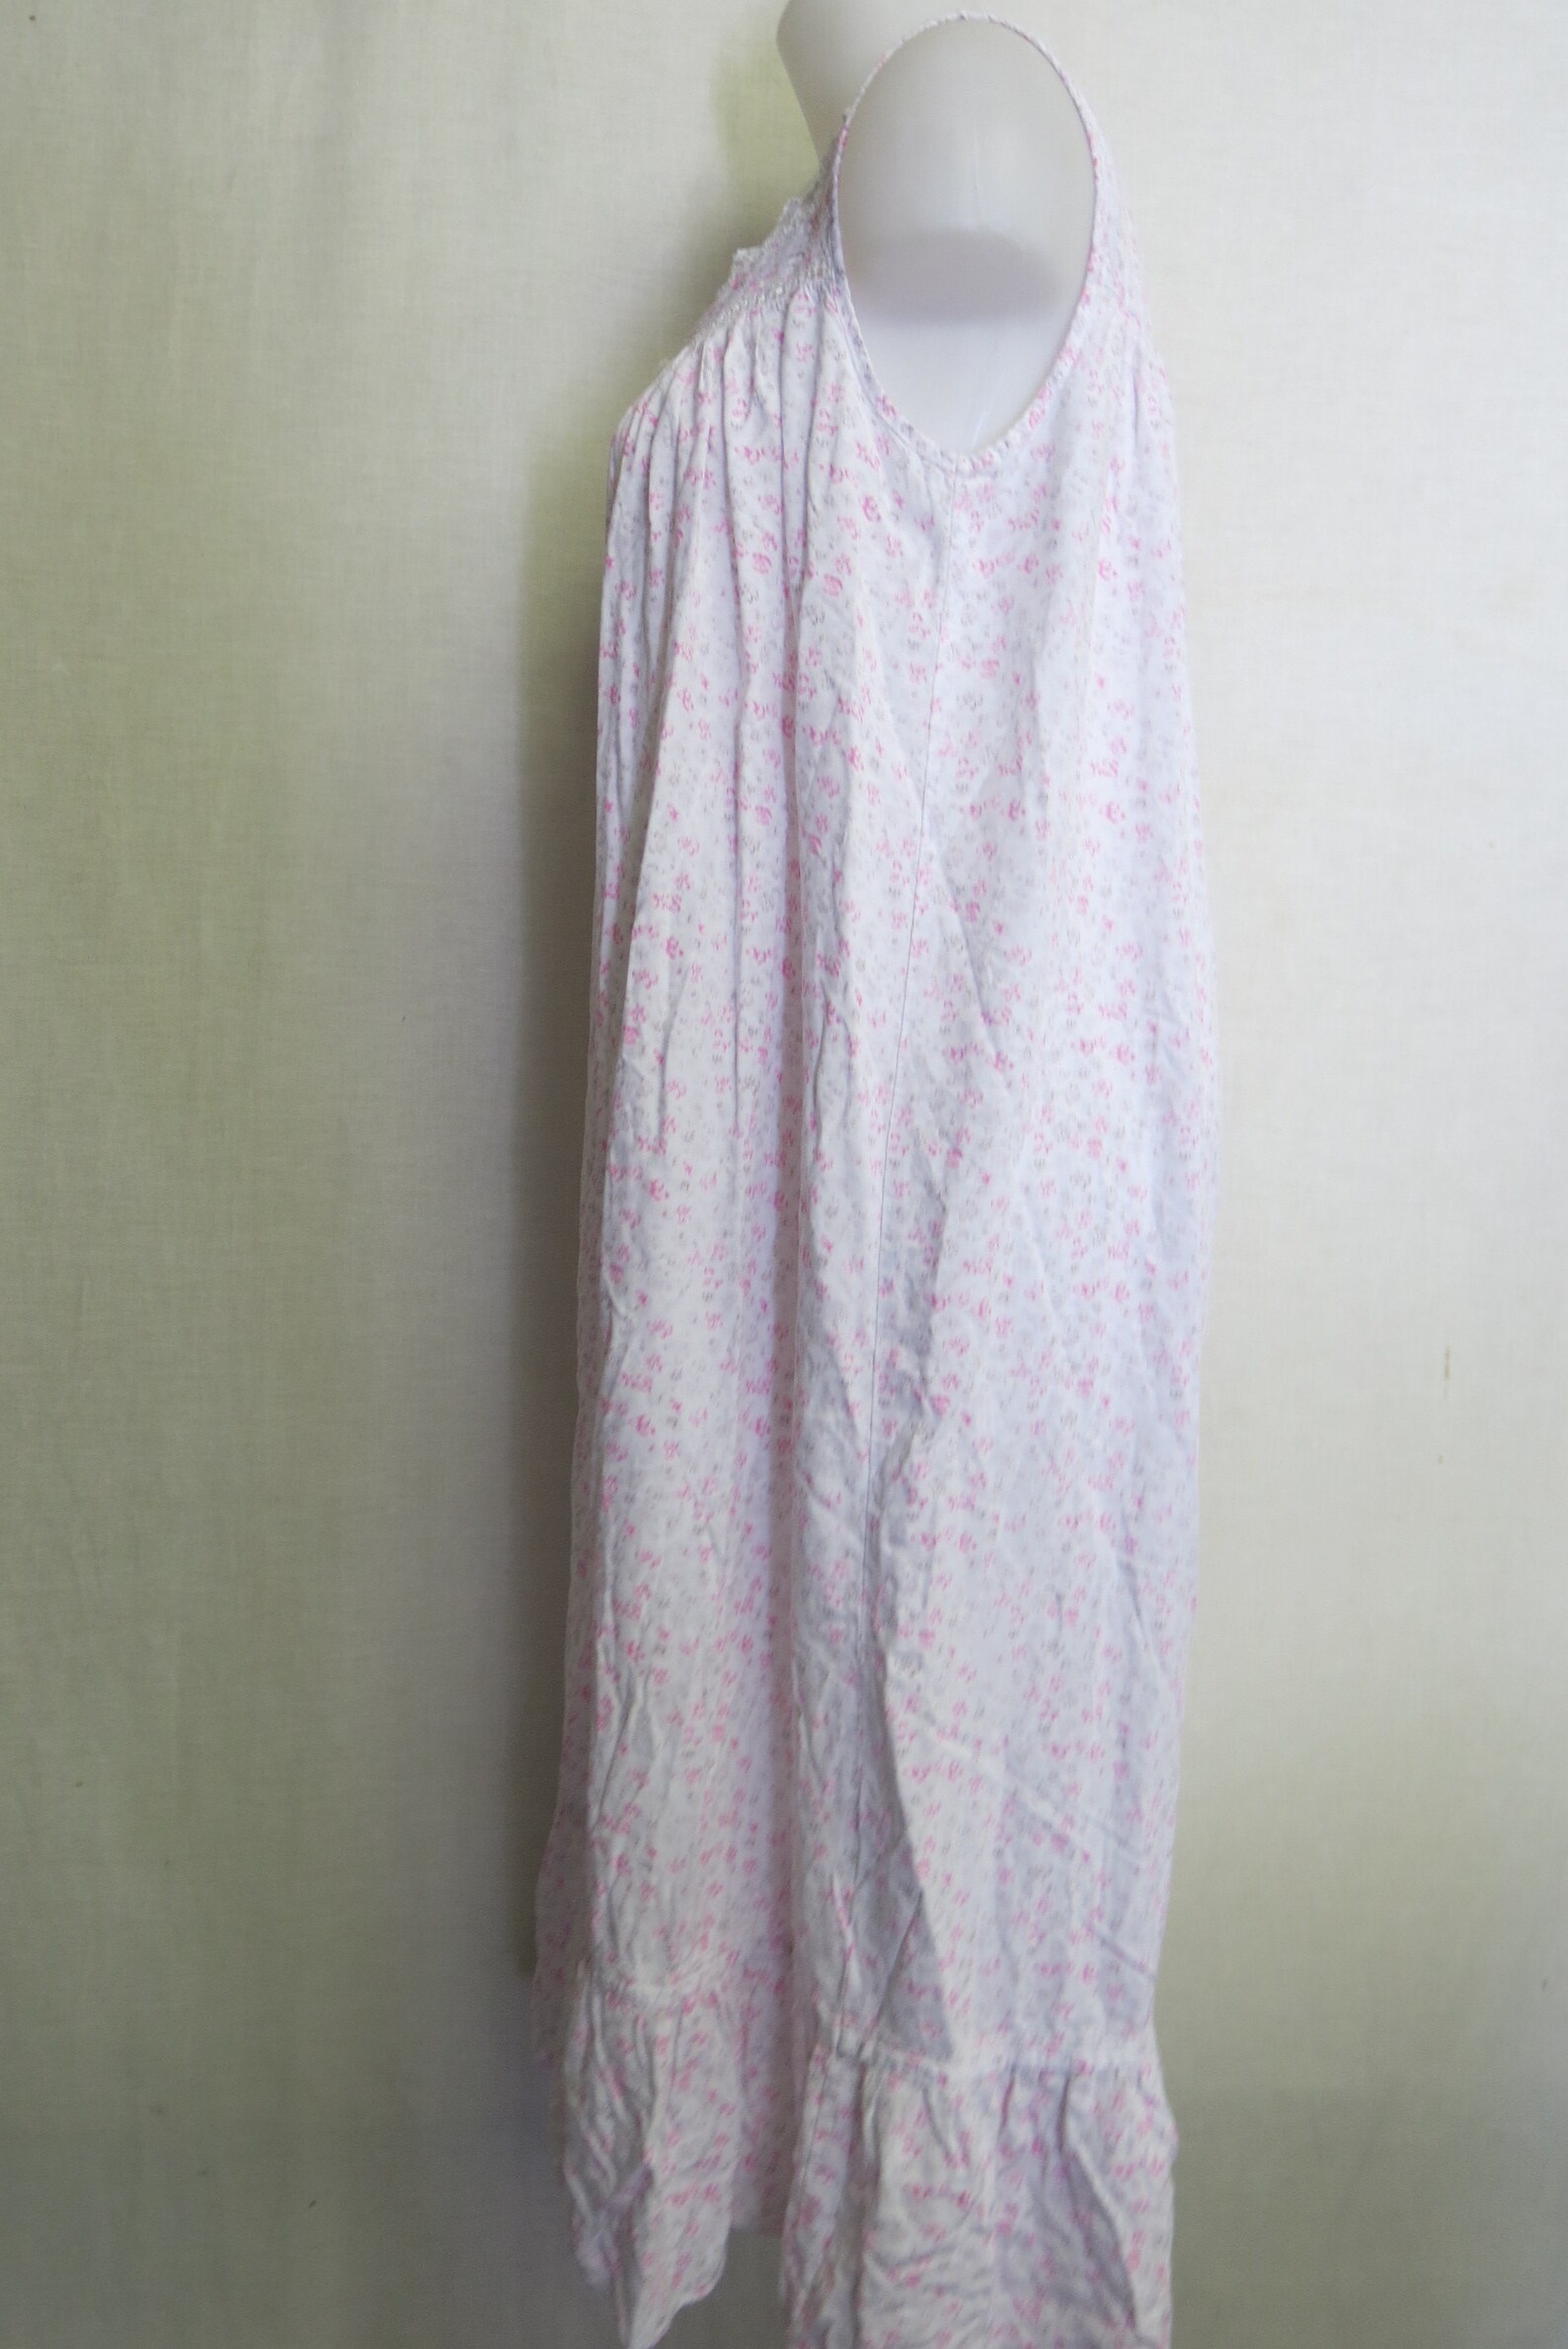 Old Fashioned Nightgown Cotton Nightgown Eileen West - Etsy